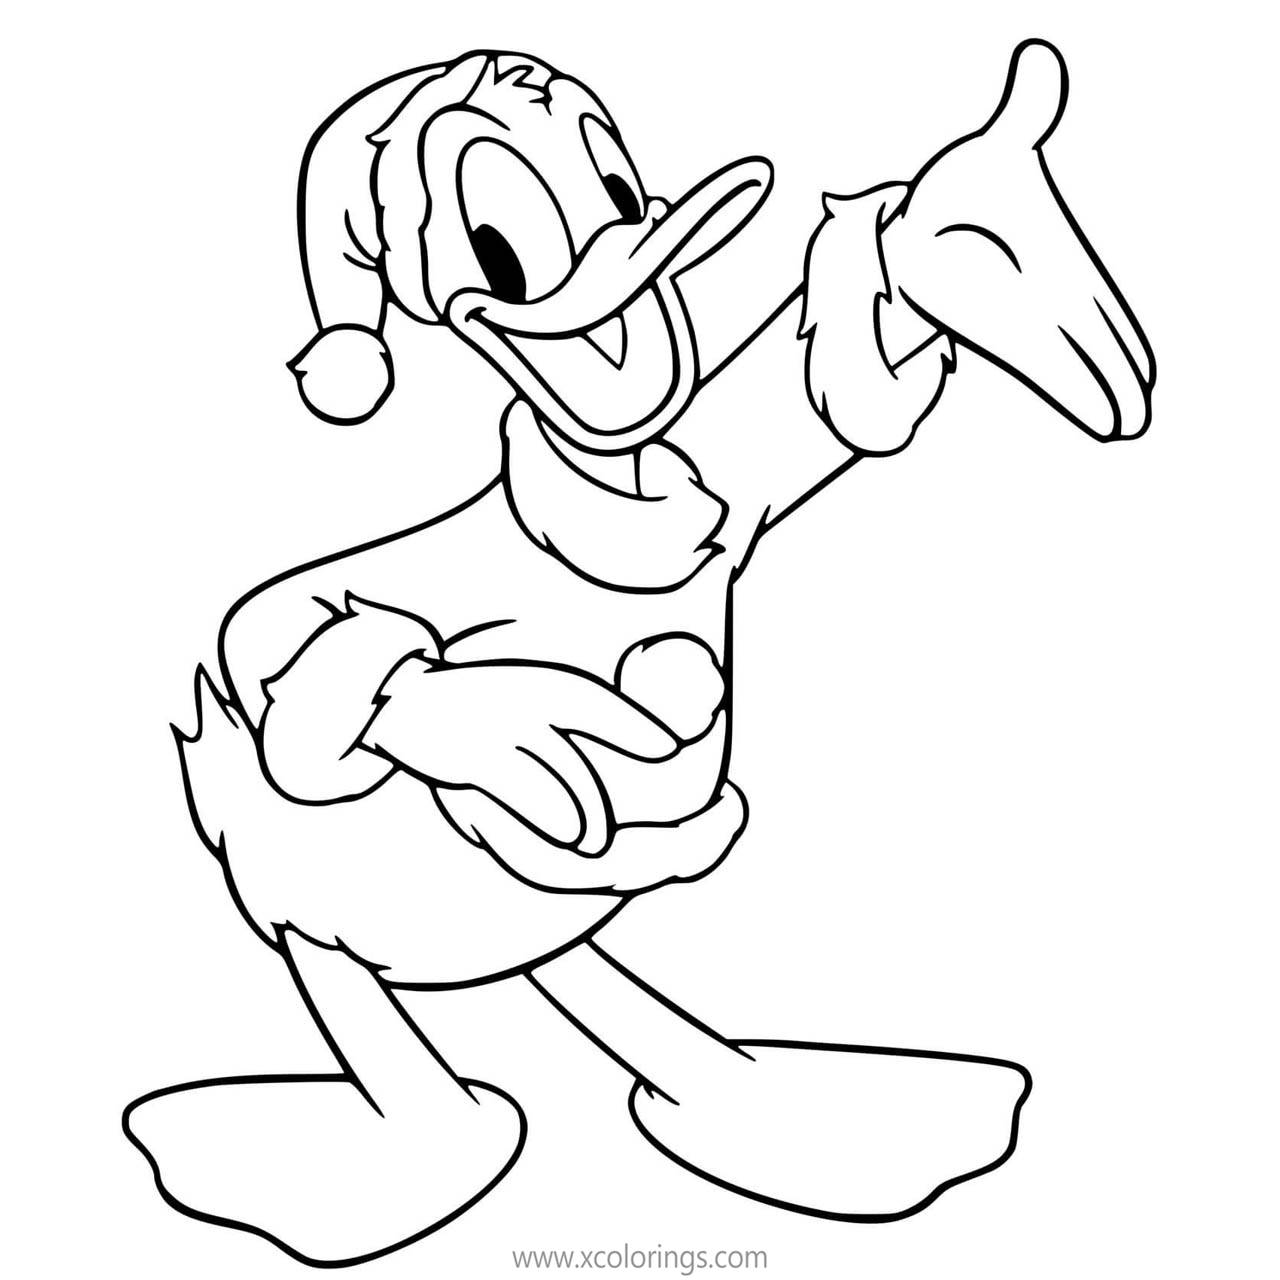 Free Donald Duck Christmas Santa Claus Coloring Pages printable